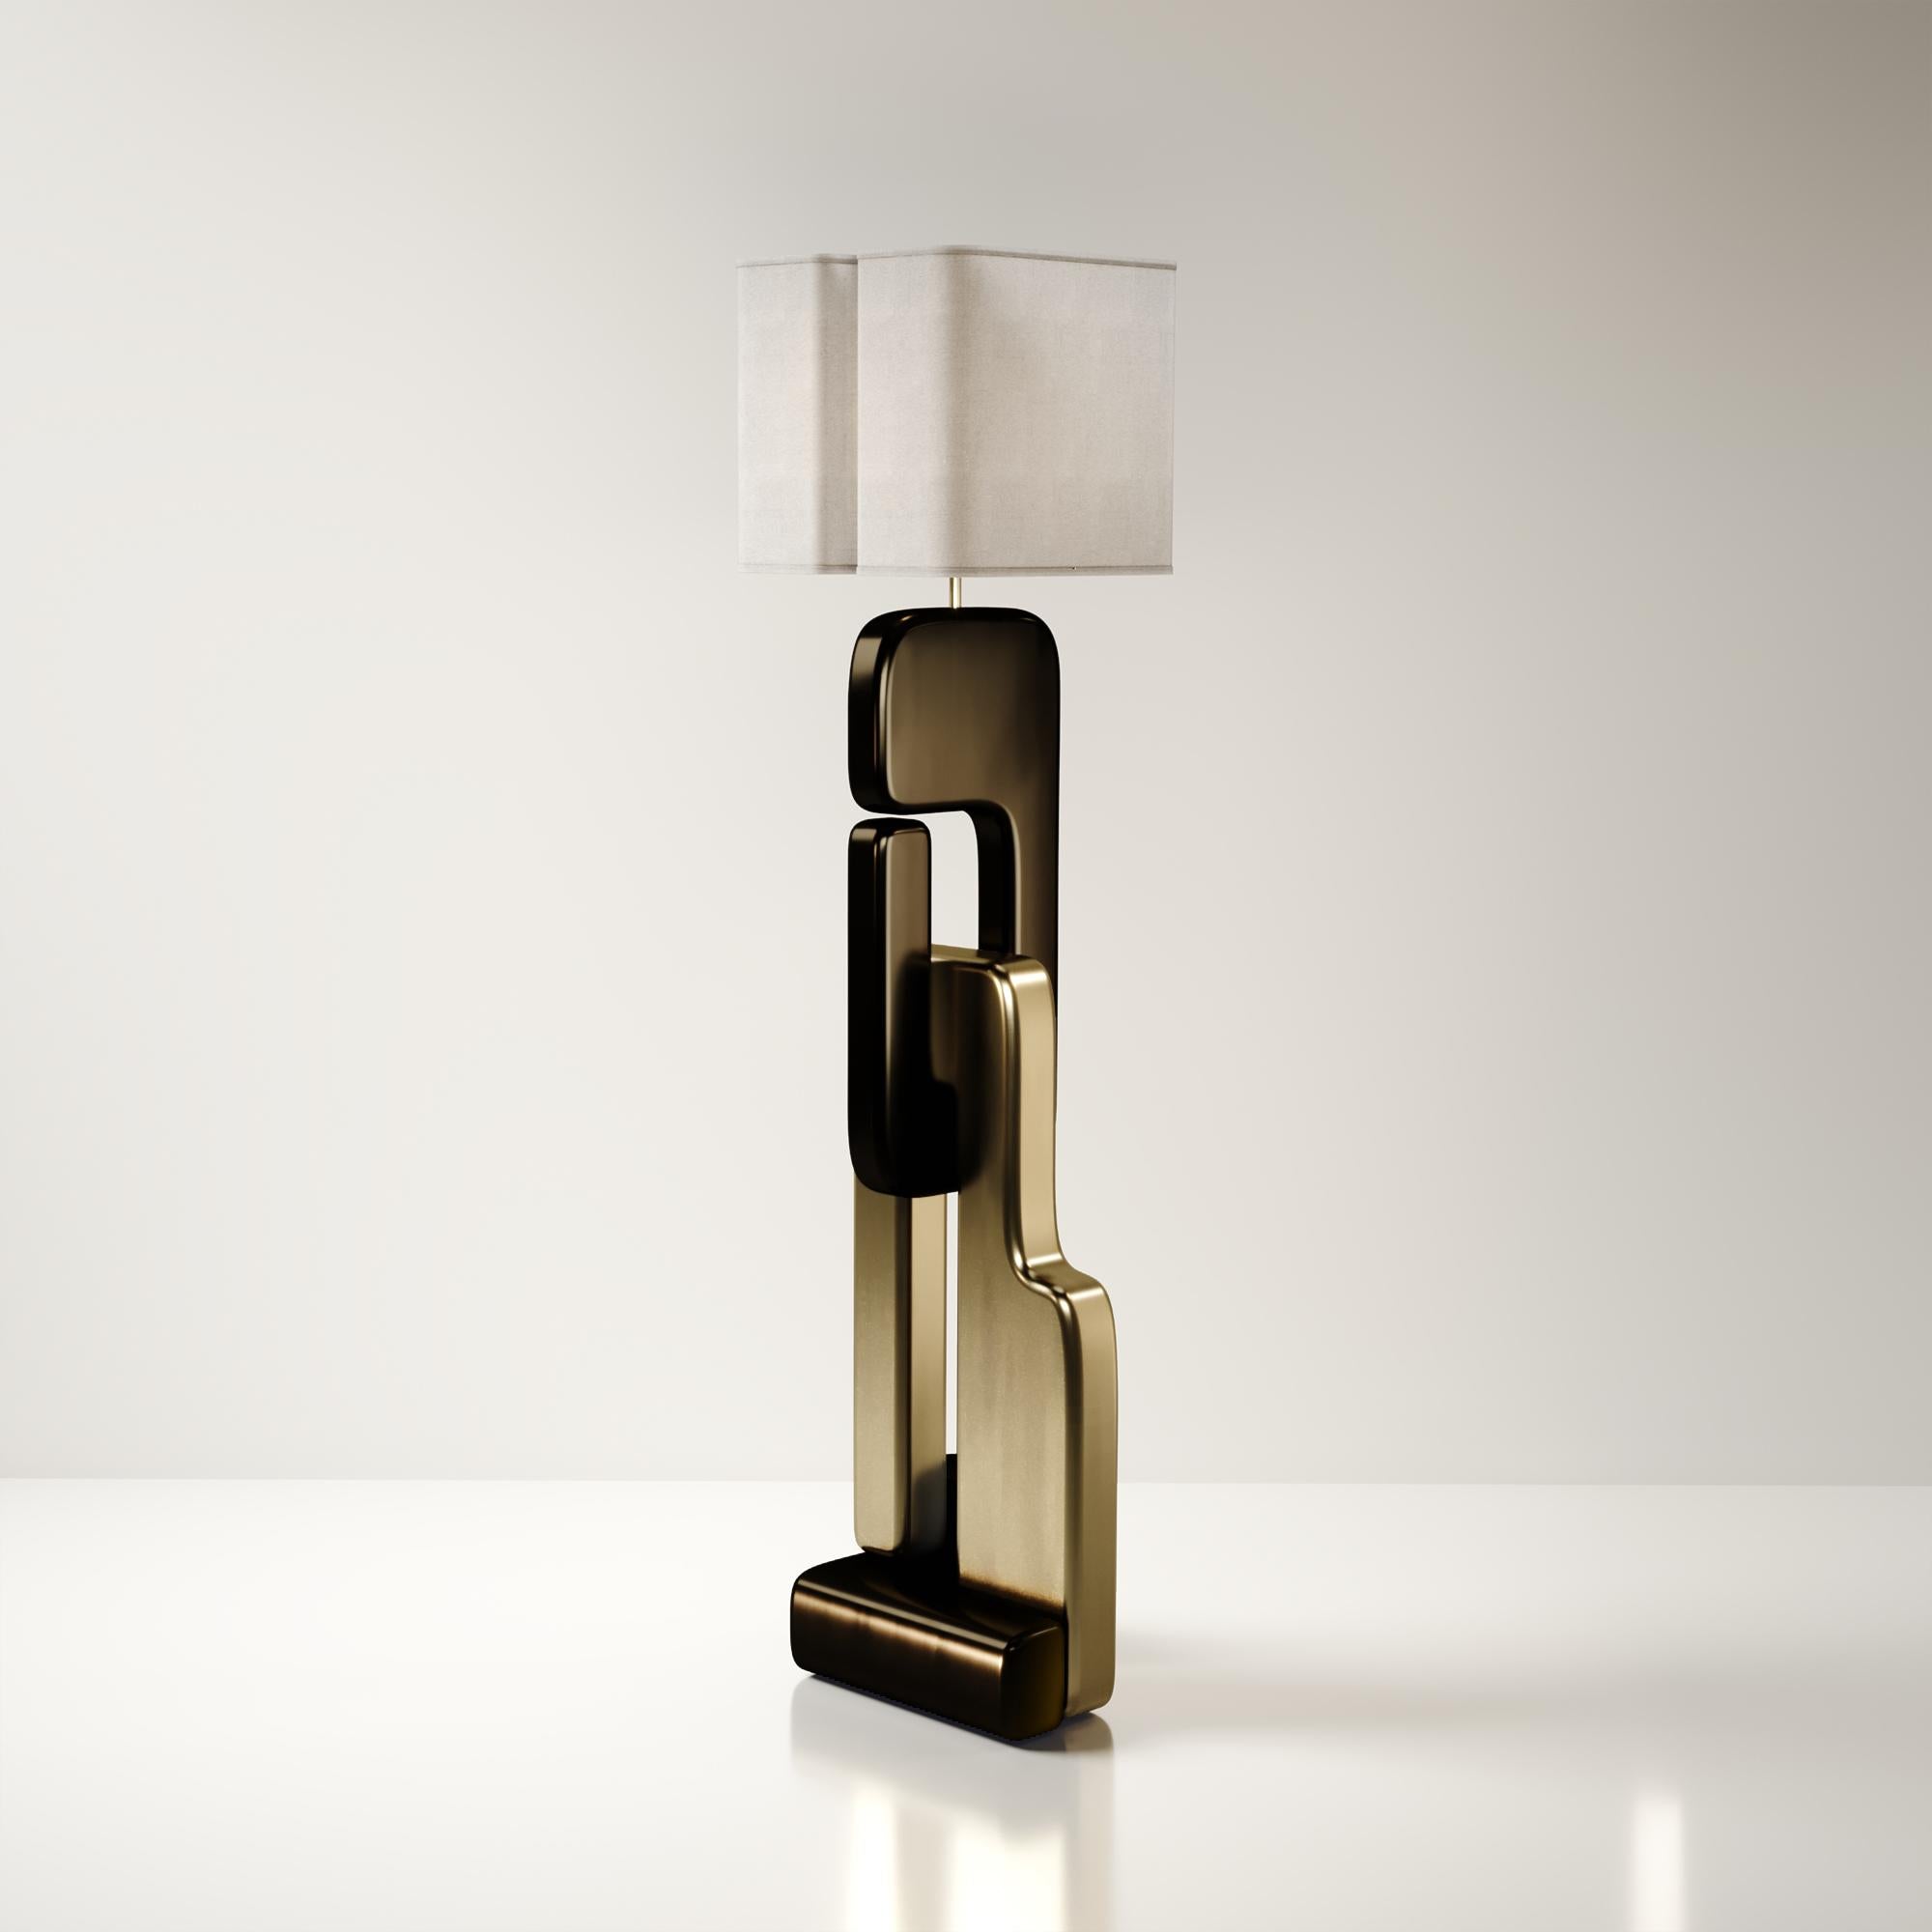 The Apoli floor lamp by Kifu Paris is both dramatic and organic it’s unique design. The ethereal geometric and sculptural base is made entirely from bronze-patina brass. This piece is designed by Kifu Augousti the daughter of Ria and Yiouri